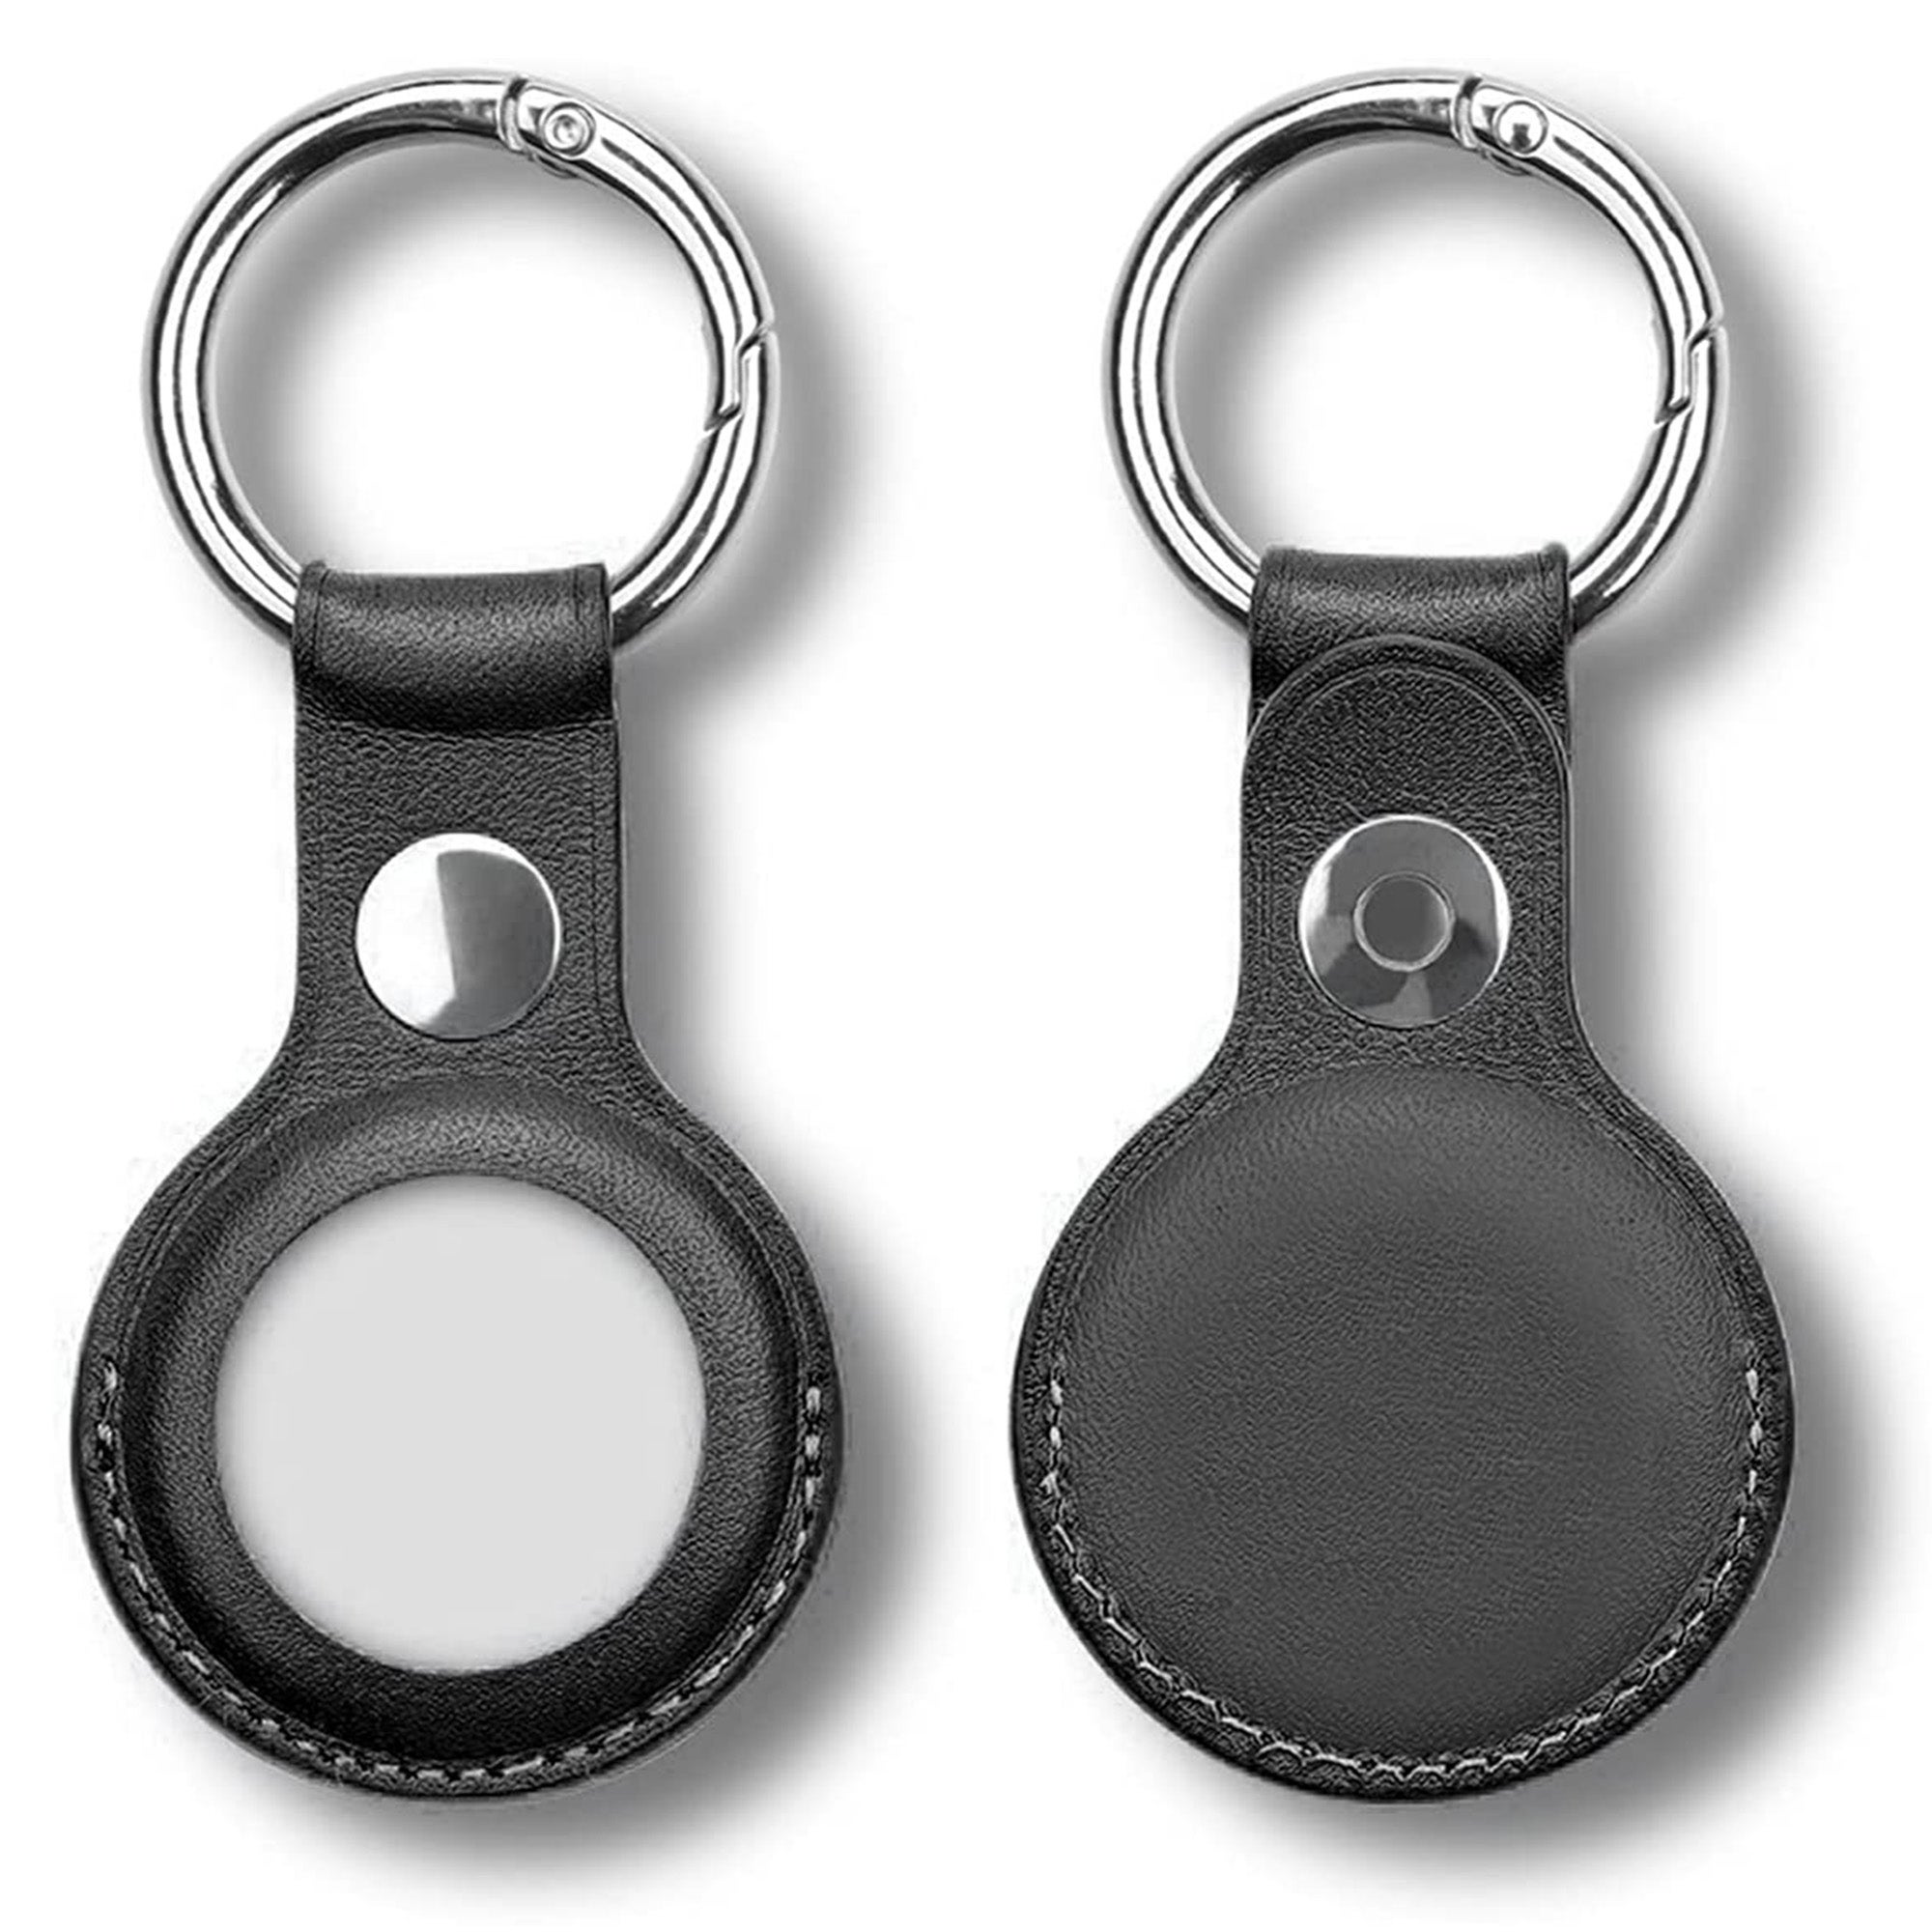 [2 pack] MEZON Black PU Leather Protective Case Holder for Apple AirTag Tracker with Keychain Ring (Leather, 2x Black)